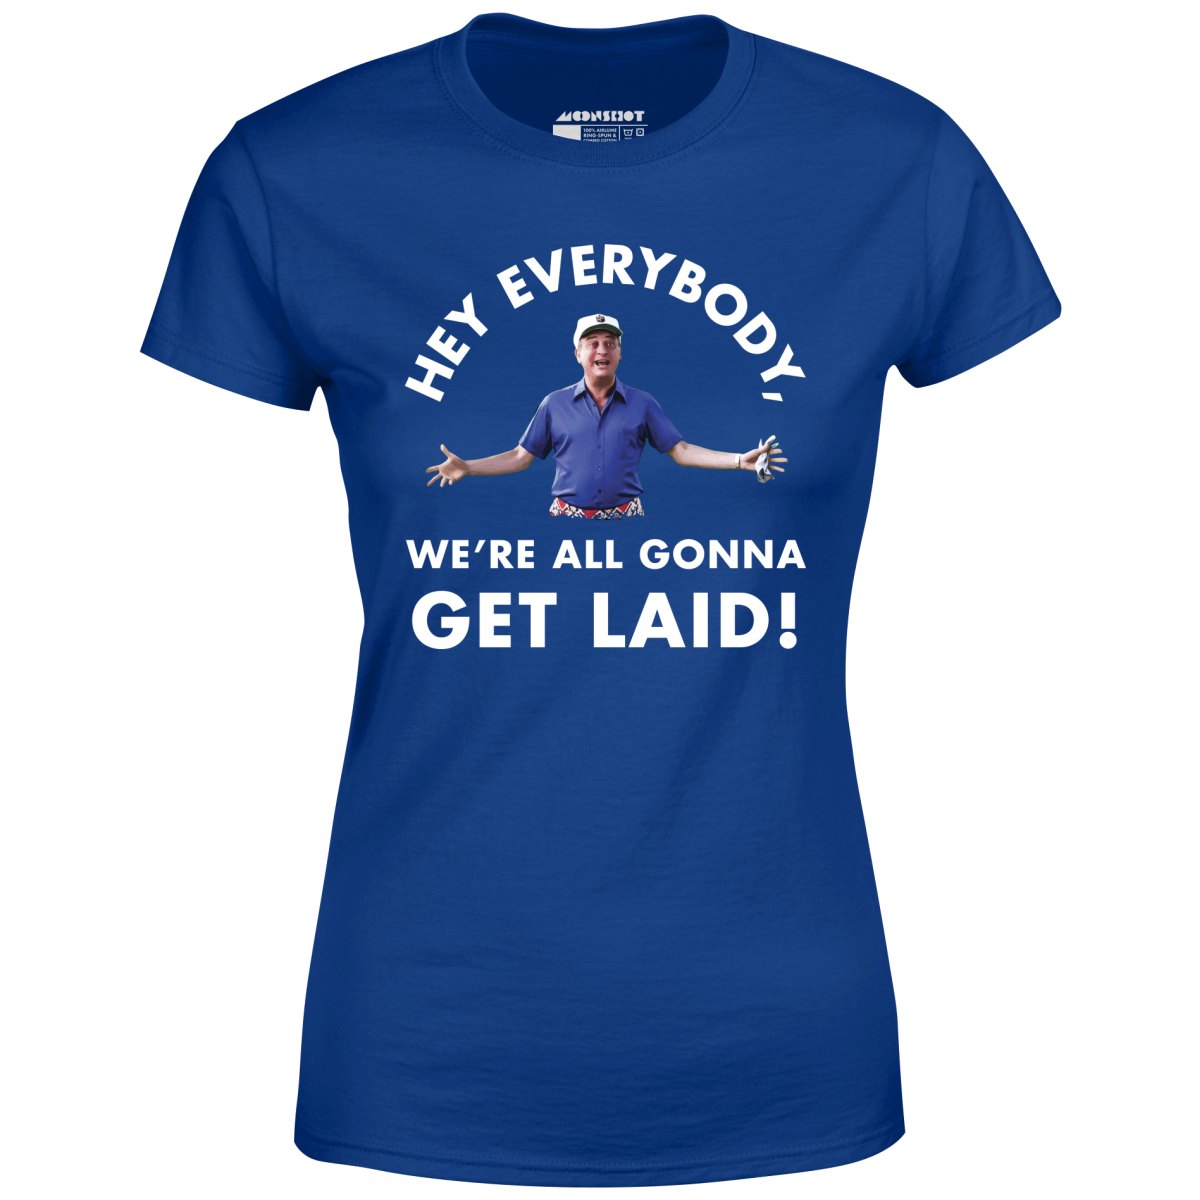 Hey Everybody, We're All Gonna Get Laid! - Women's T-Shirt